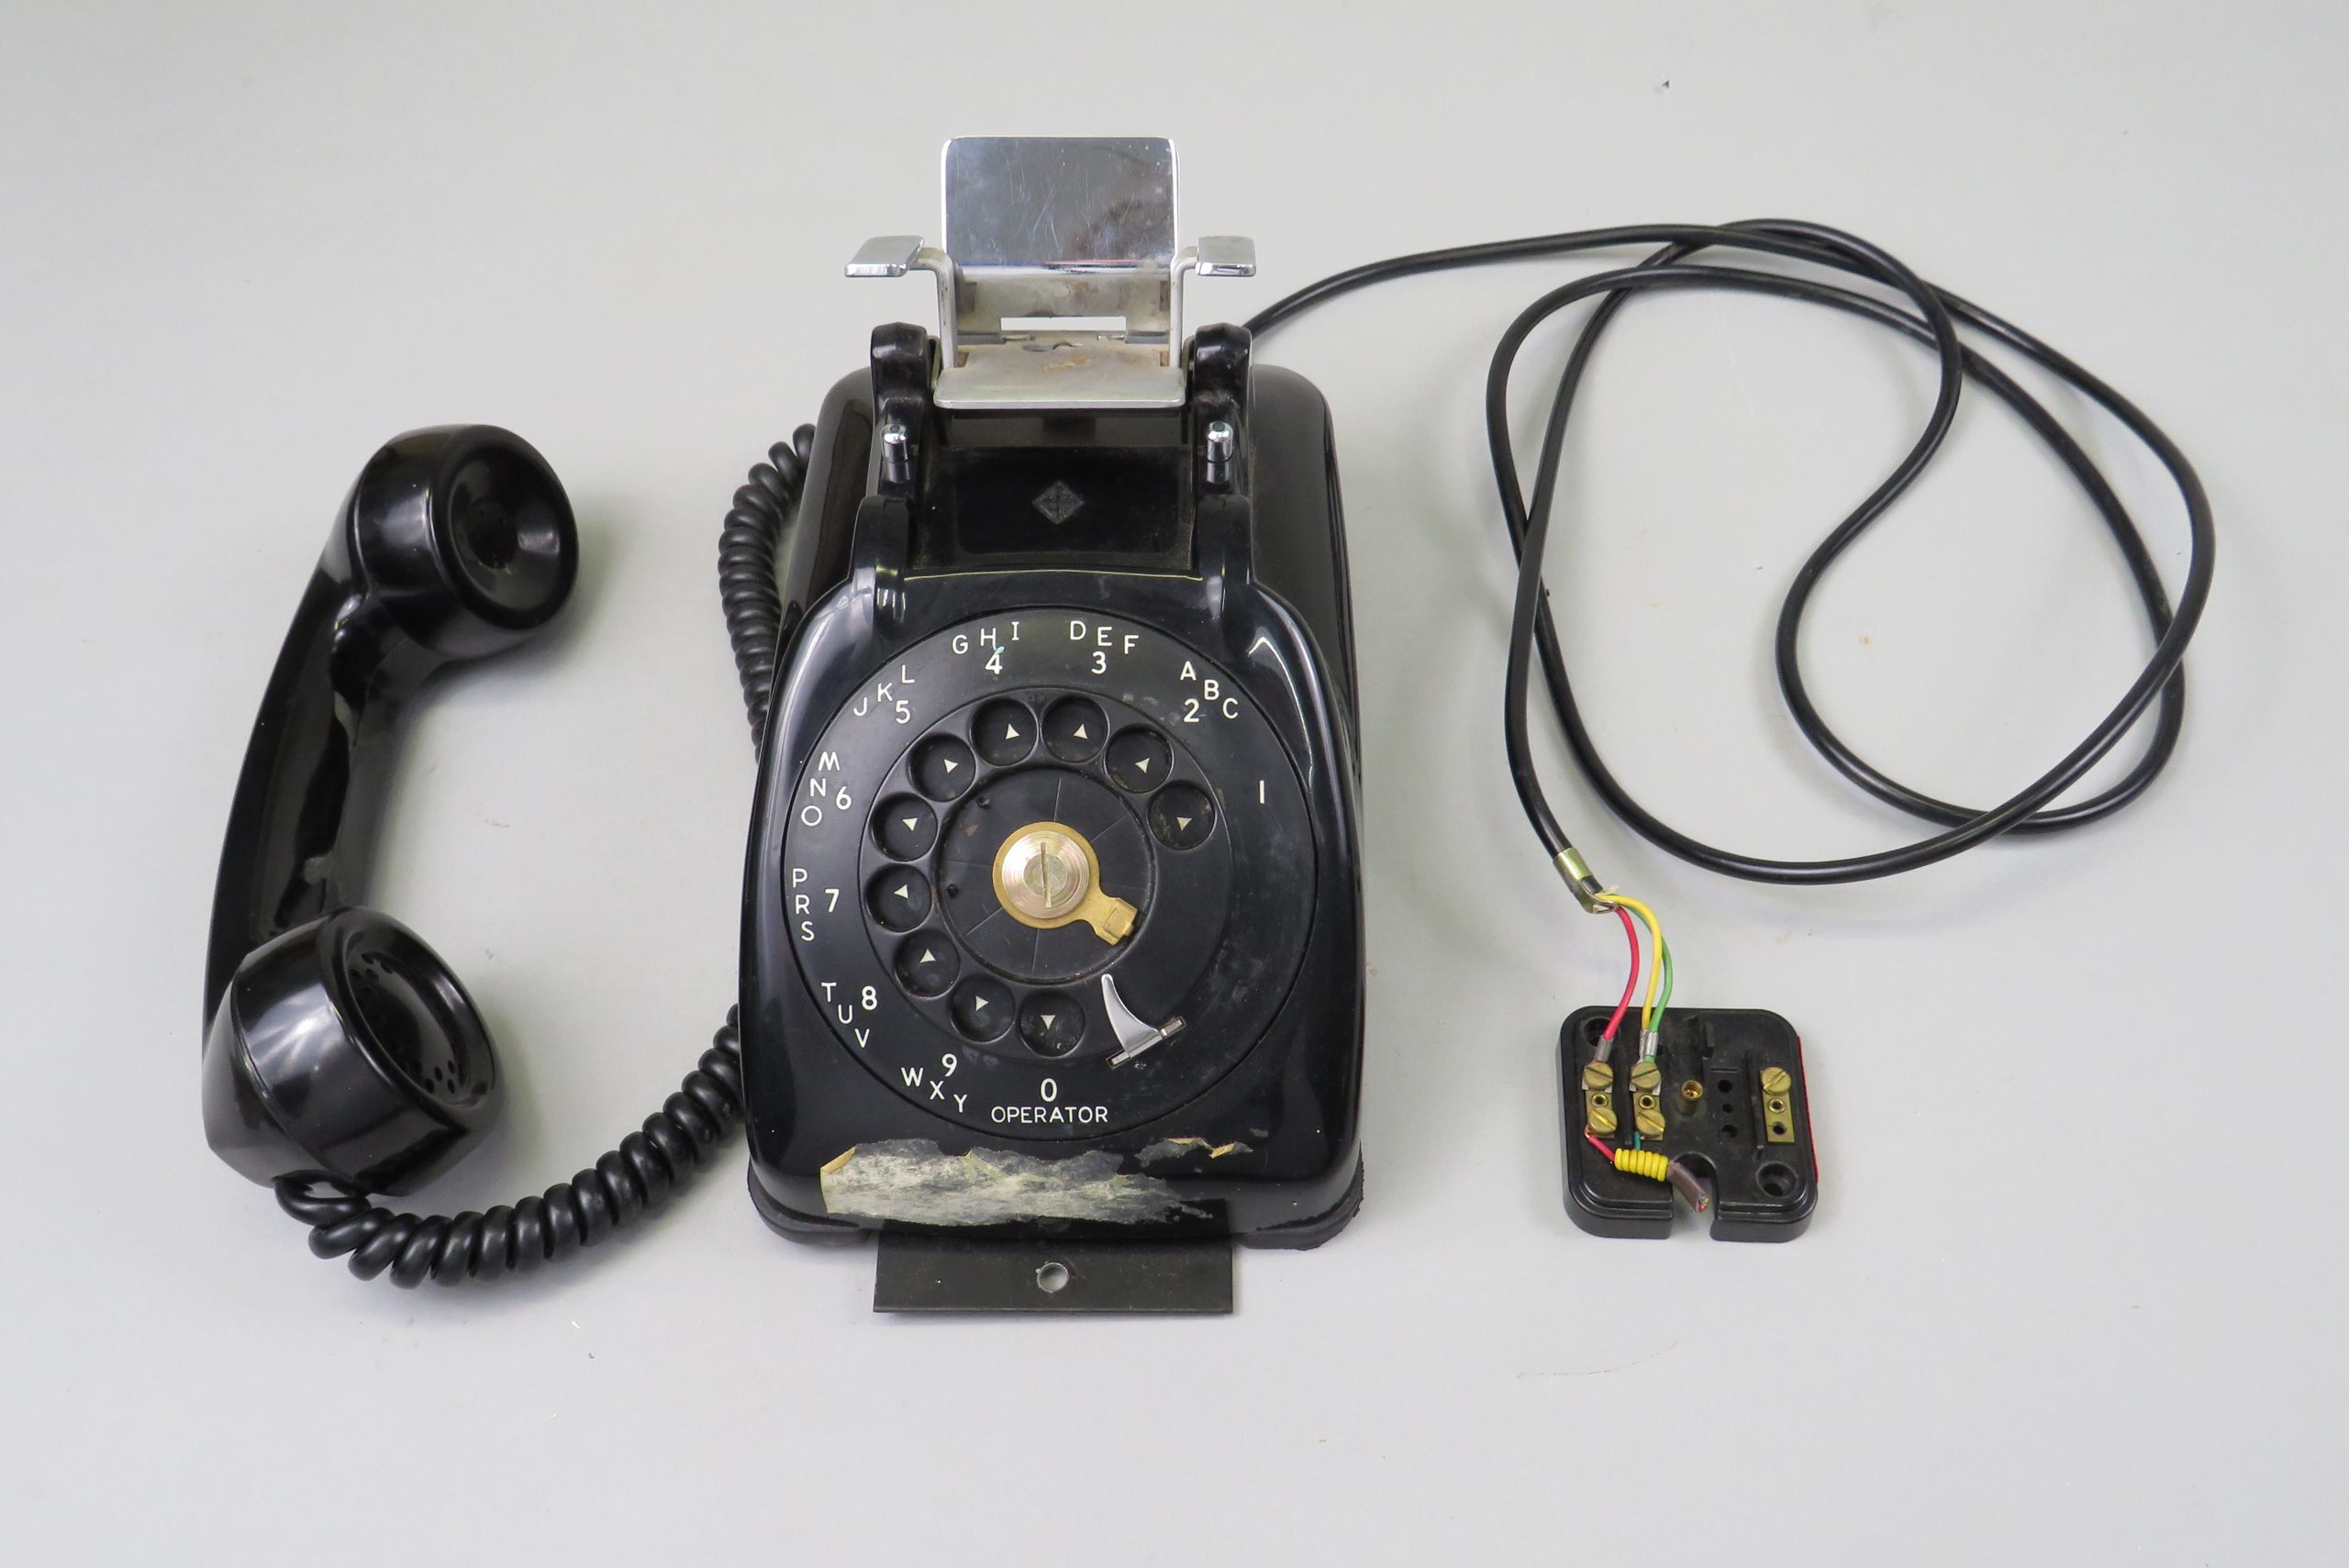 25 Artifacts: Rotary Telephone – Diefenbunker Museum